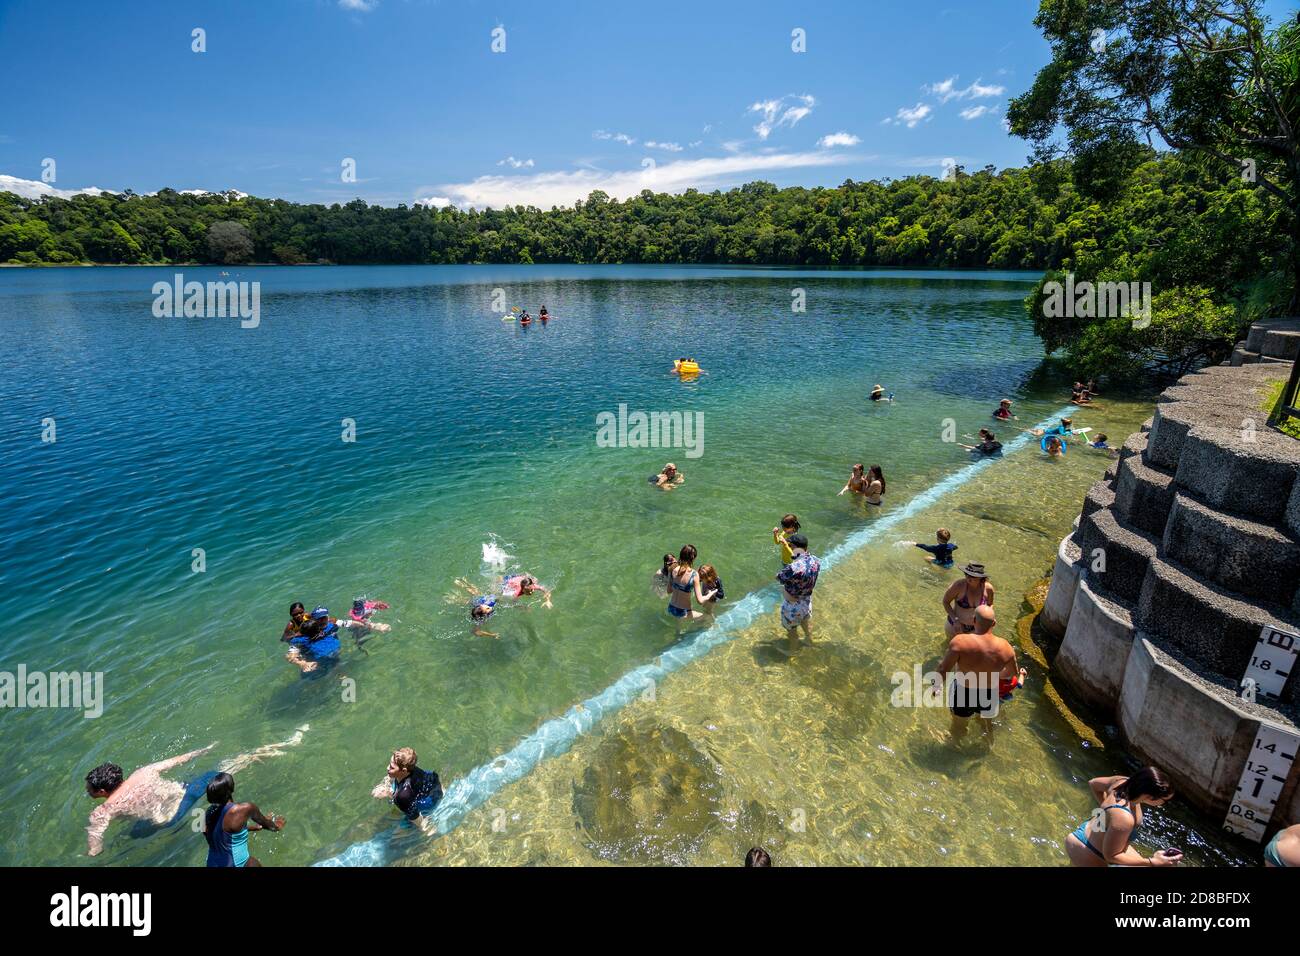 Swimmers at Lake Eacham, Atherton Tablelands, Crater Lakes National Park, North Queensland, Australia Stock Photo